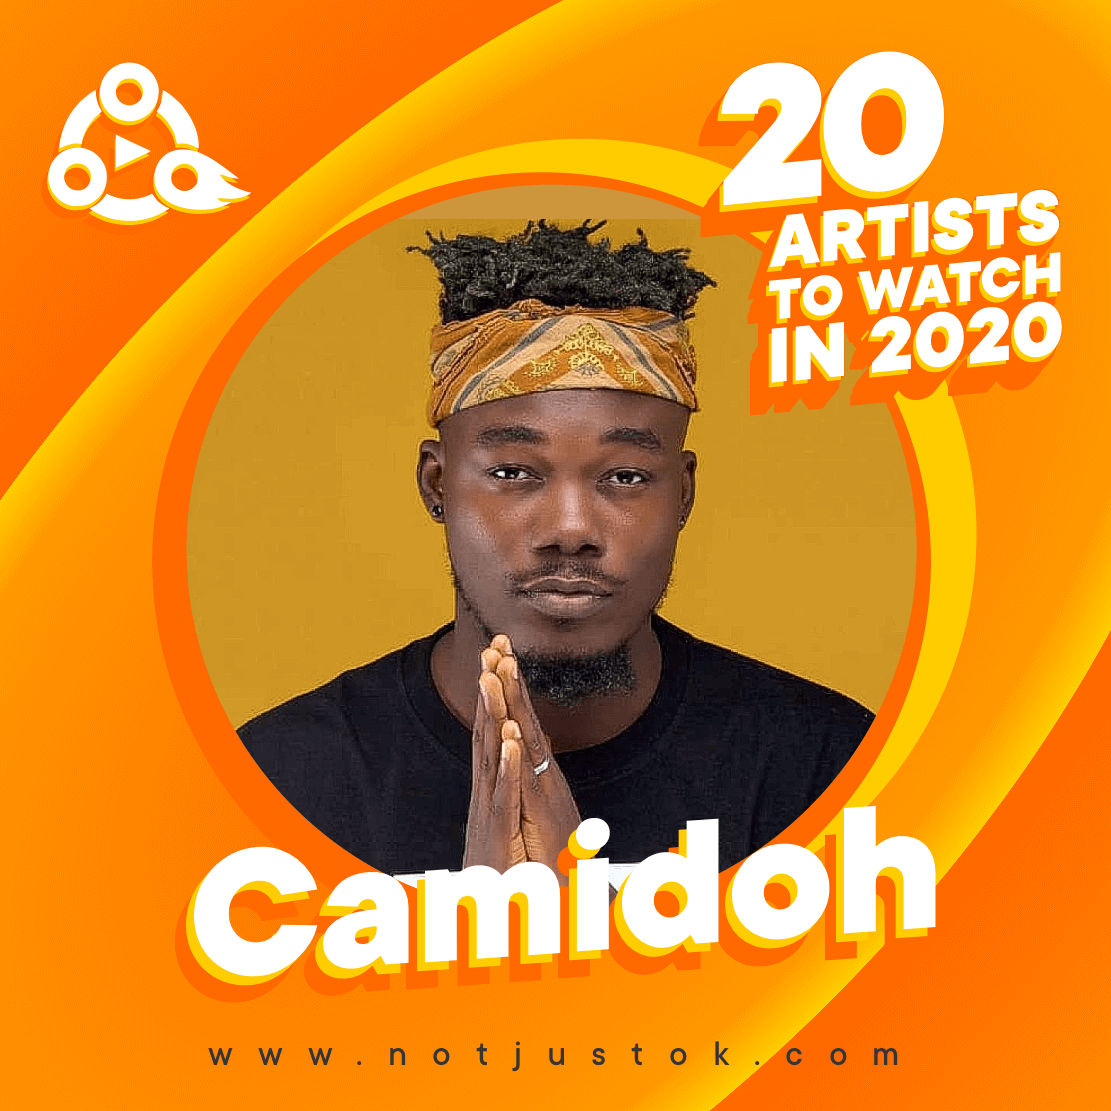 The 20 Artists To Watch In 2020